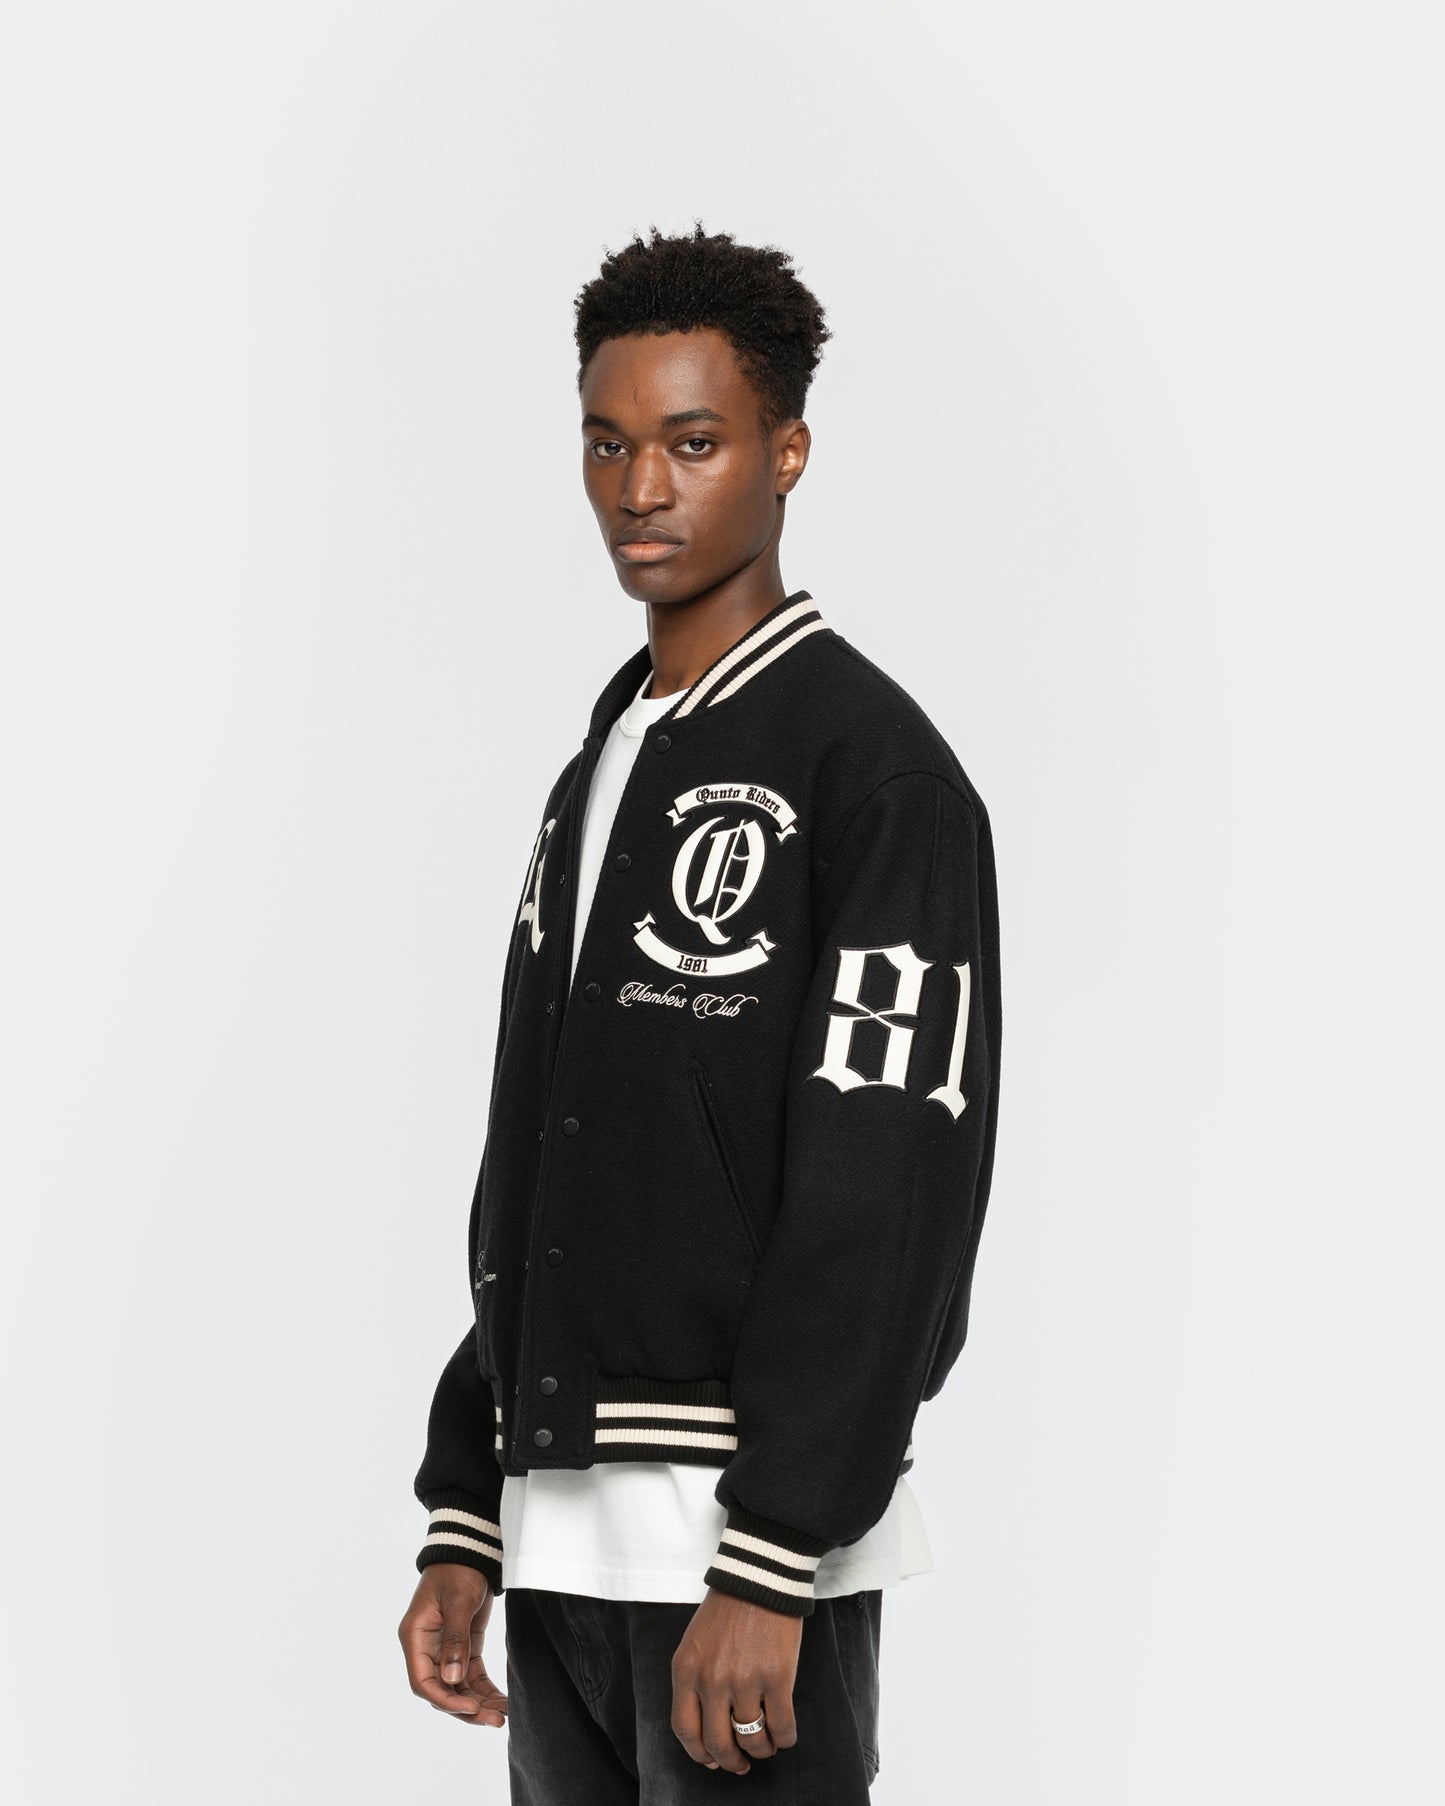 CITY OF ANGELS COLLEGE JACKET